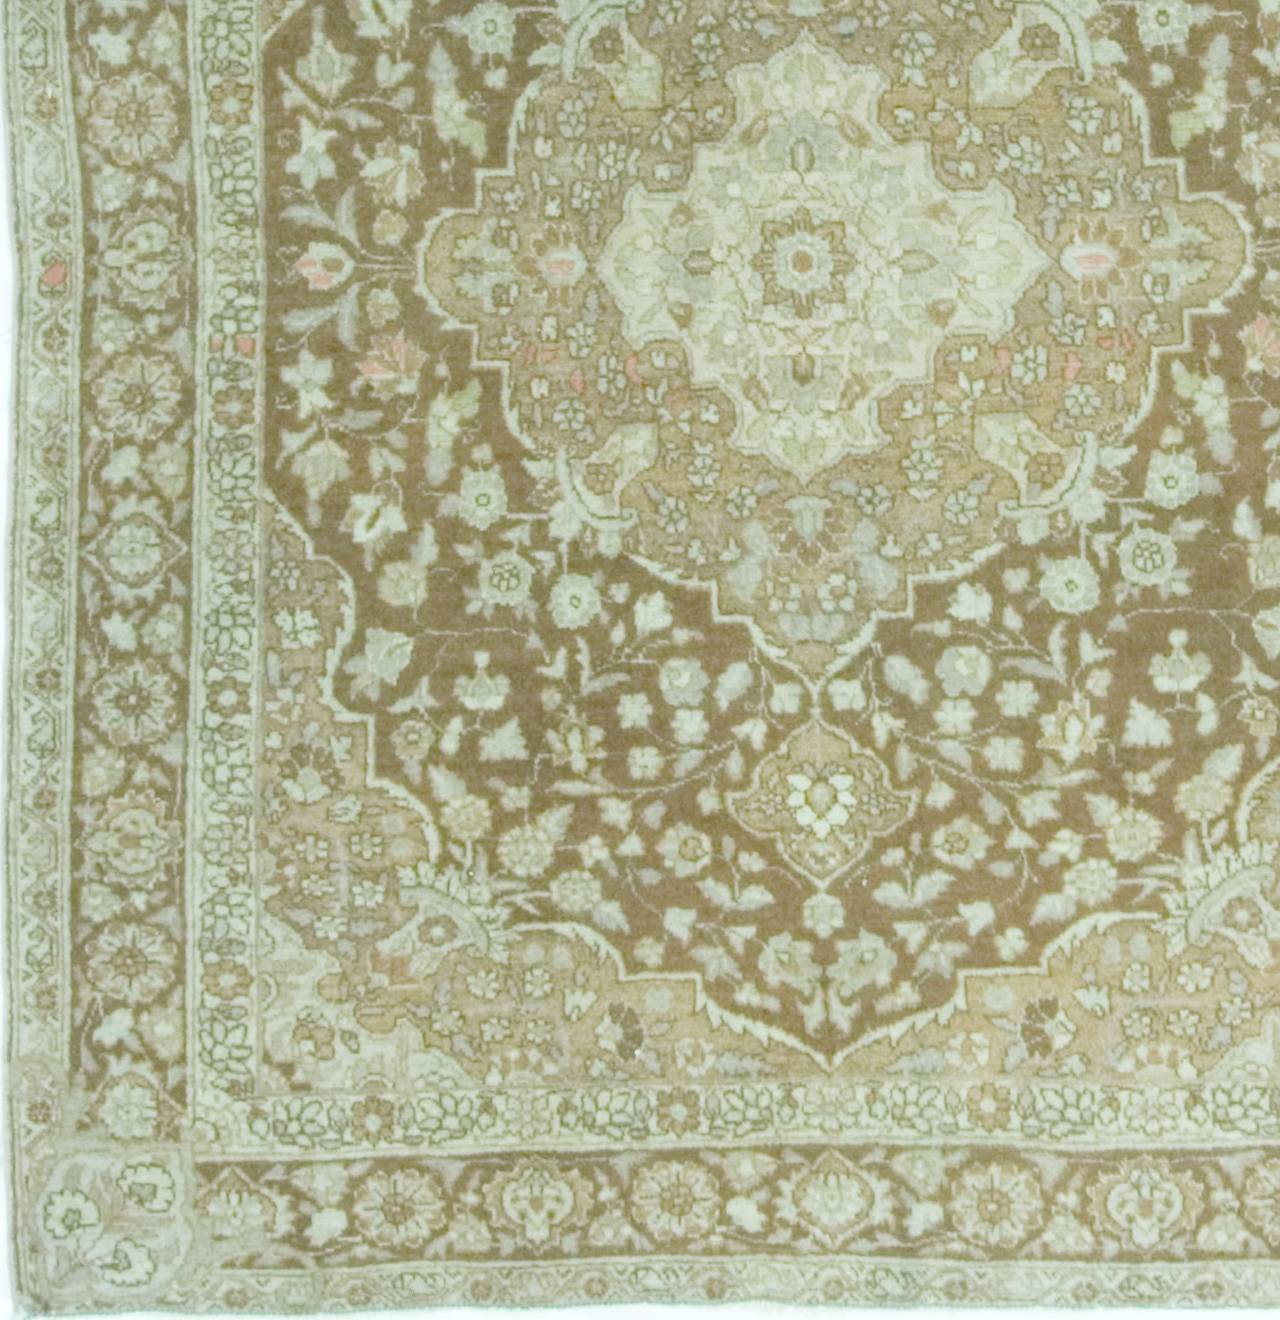 Antique Persian Tabriz rug carpet, circa 1900.The central medallion has wonderful floral details and is then enclosed in a larger medallion. The color combination of soft ivory and browns and slightly deeper shades gives a wonderful look and